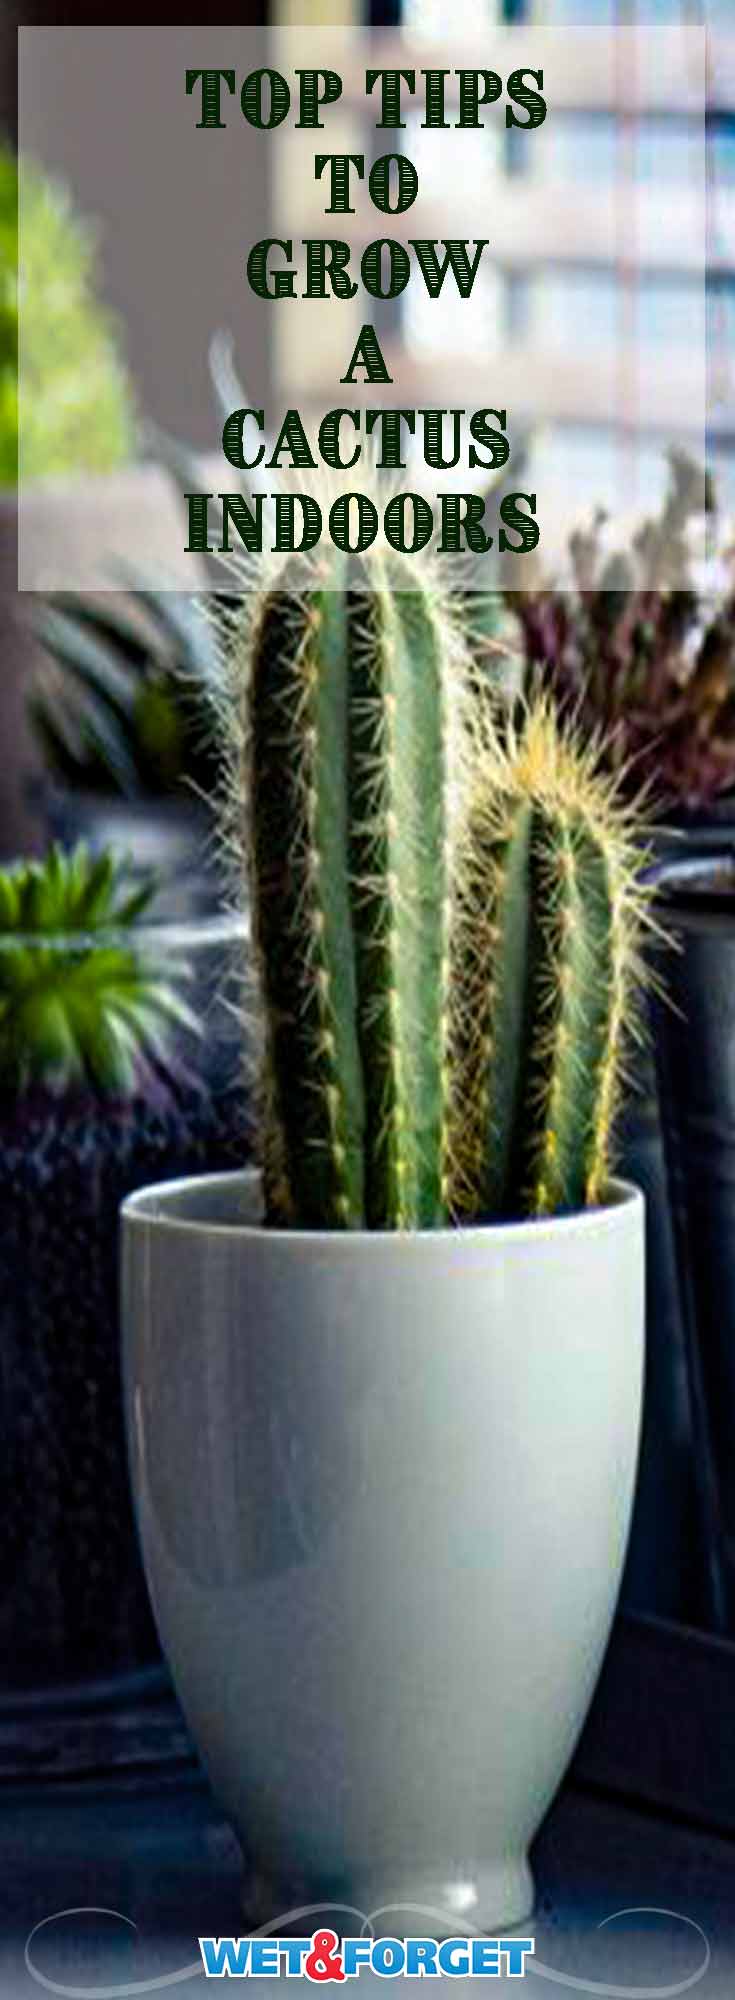 A small cactus is perfect to grow indoors! Learn about the best tips to keep your cactus in good shape indoors.